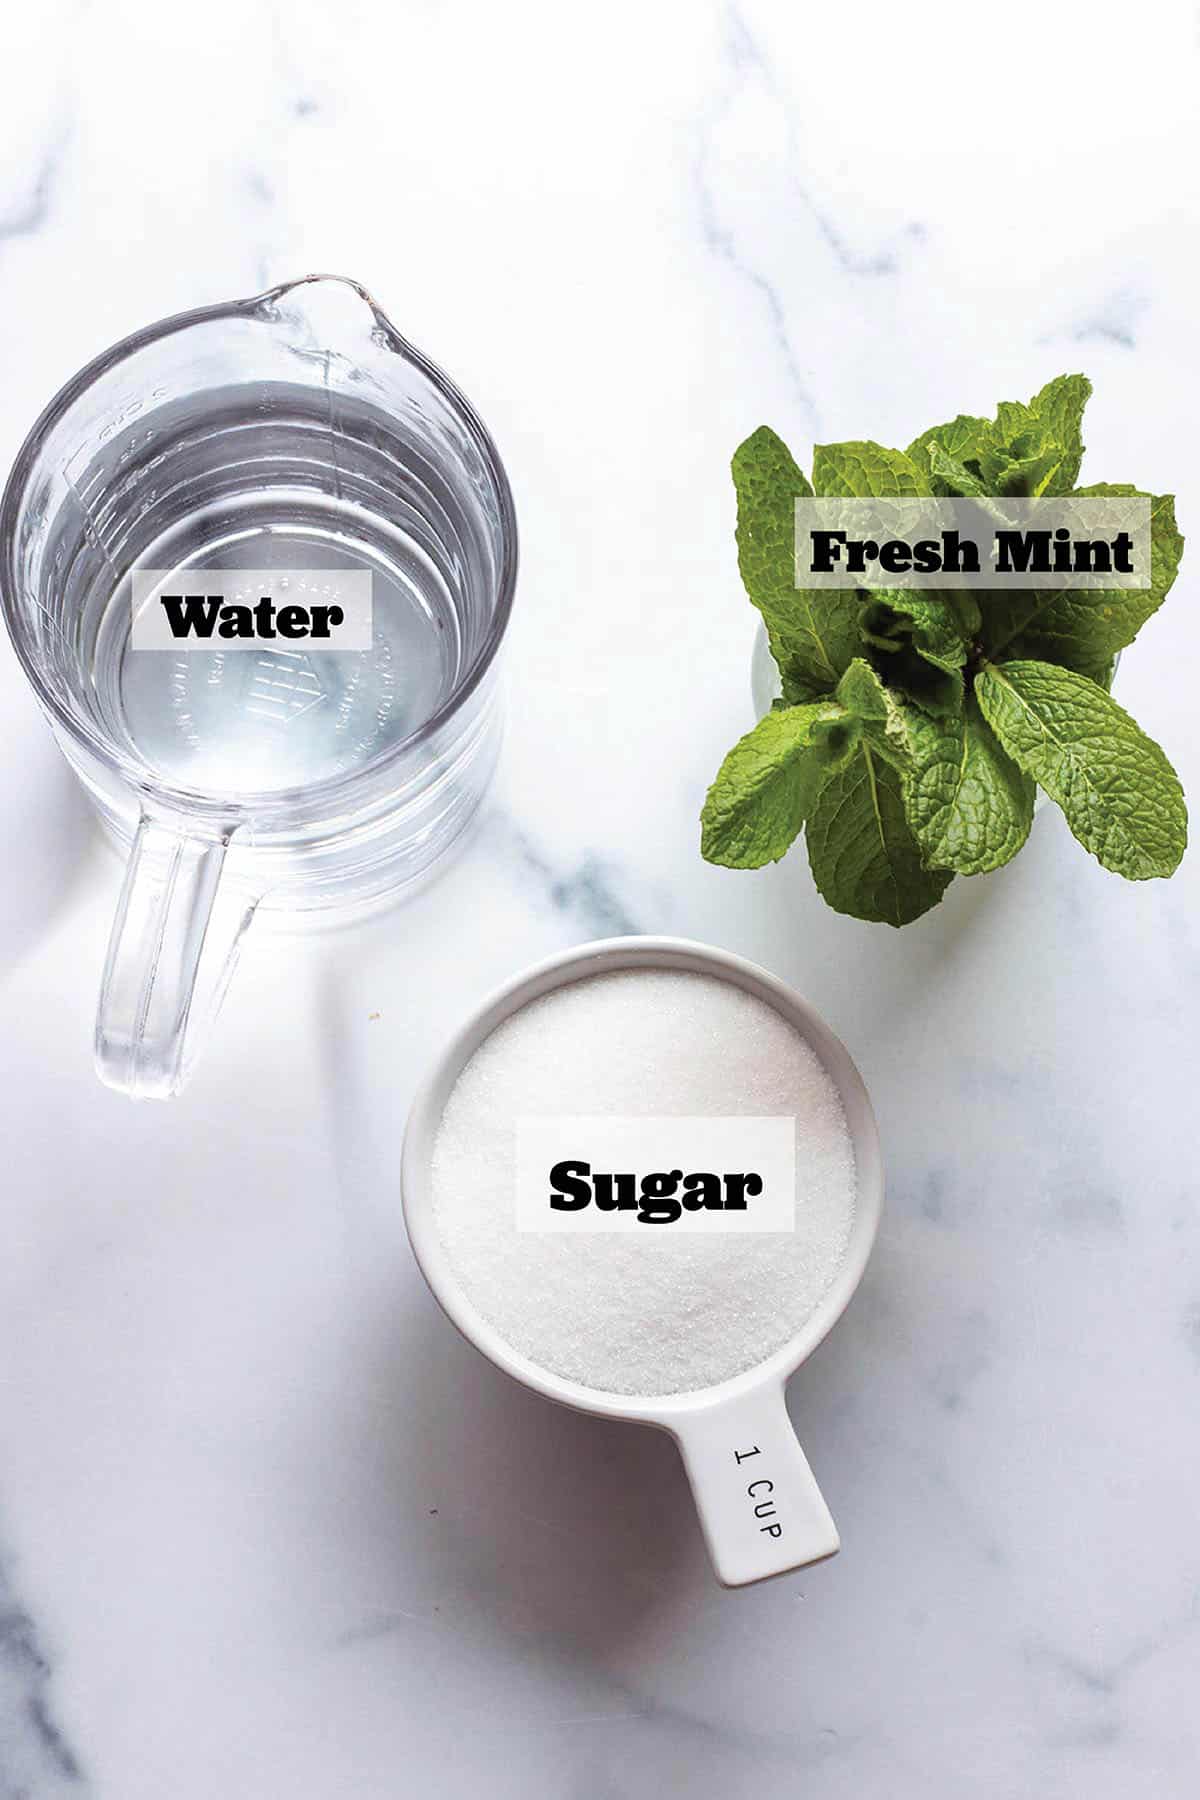 Fresh mint leaves, a cup of water and a cup of sugar.